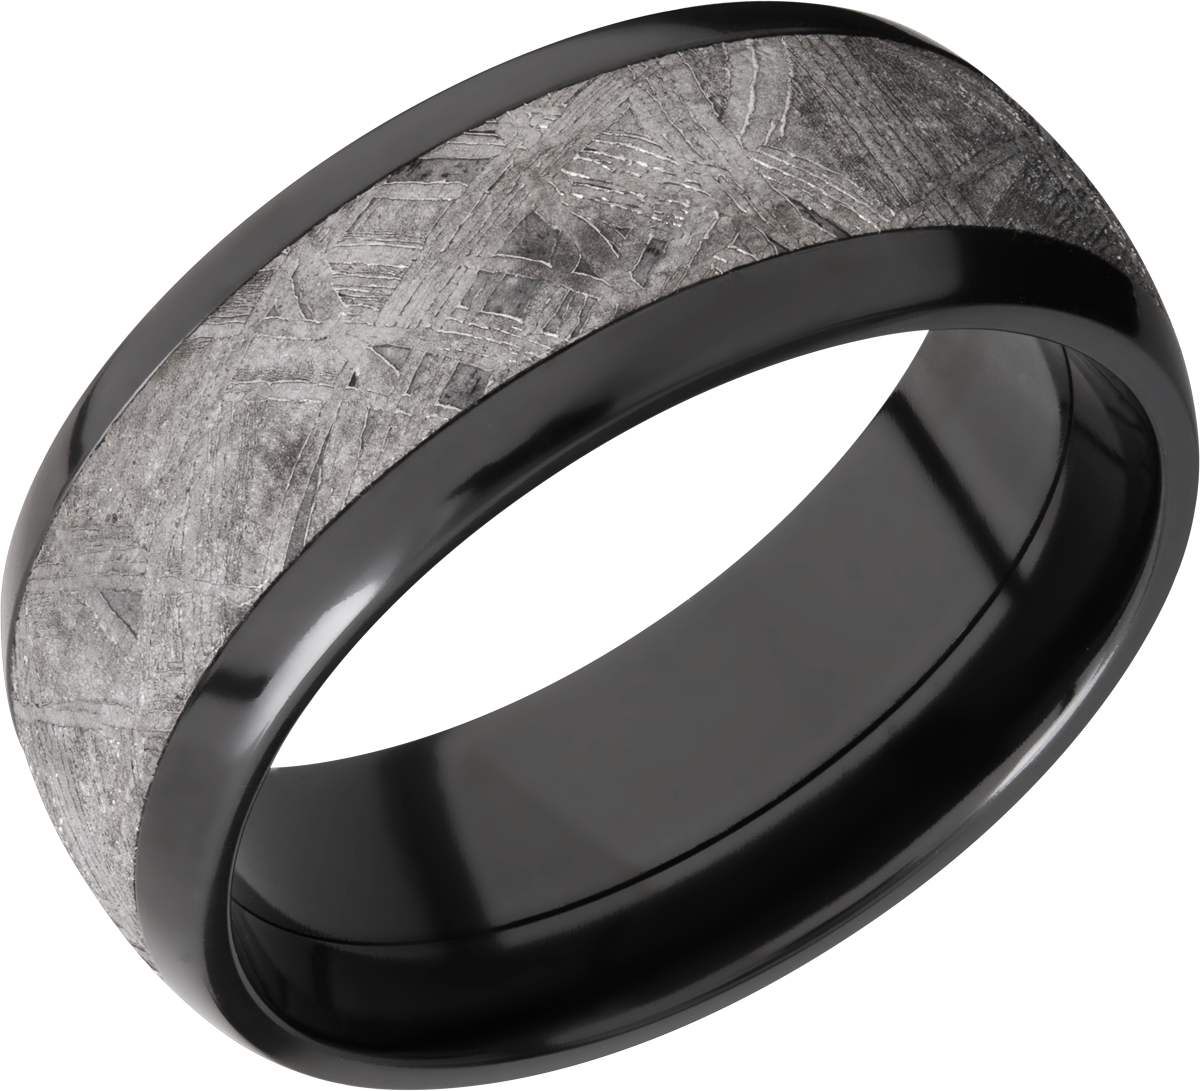 Black zirconium 8mm domed band with one inlay that is 5mm wide of meteorite. POLISH